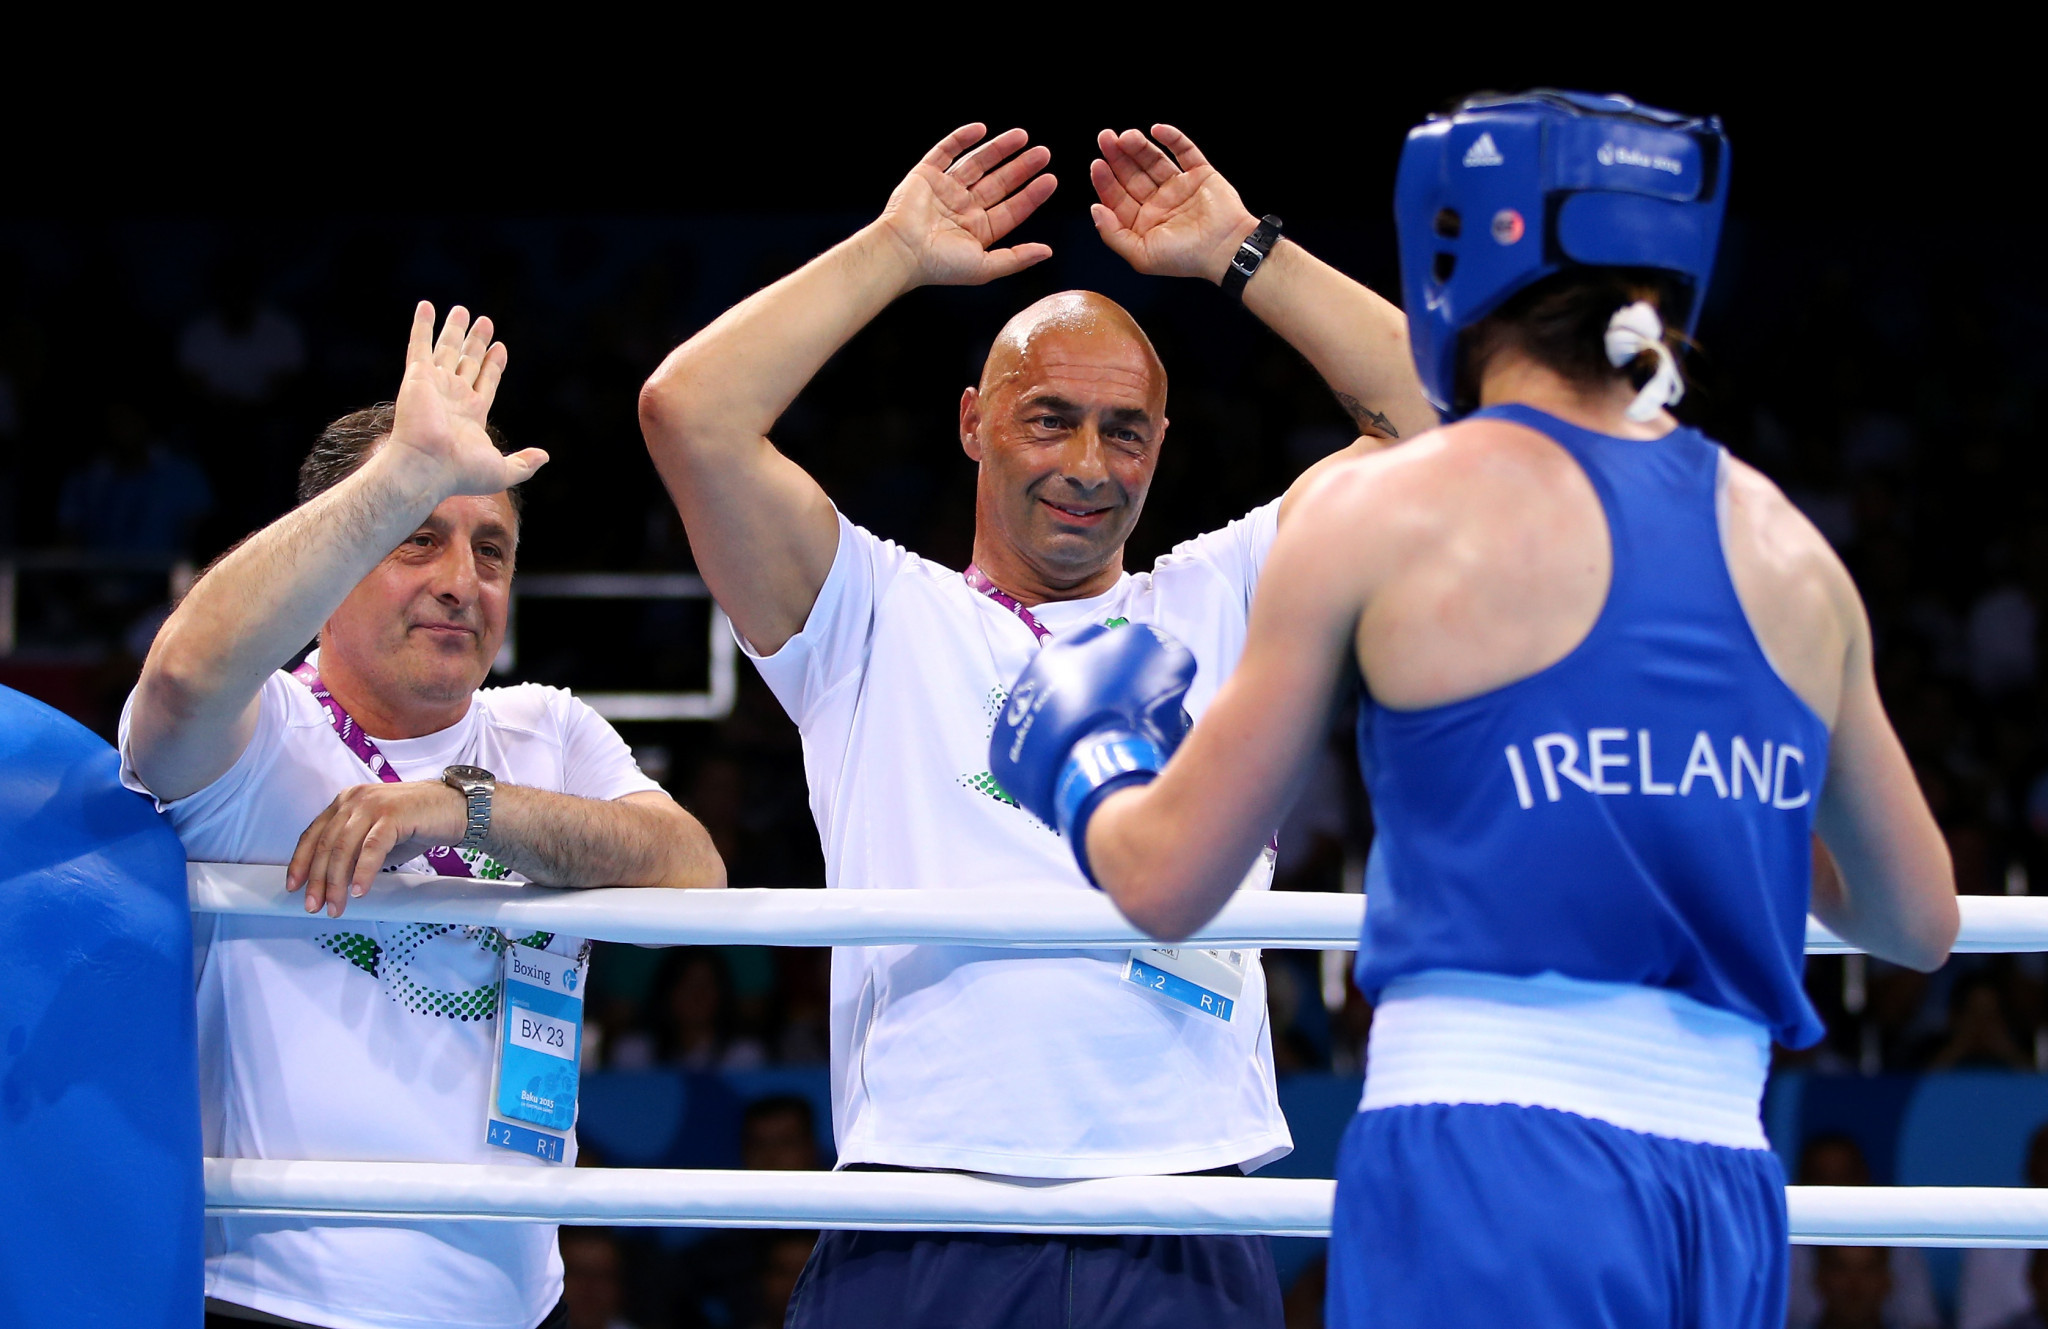 Man shot dead in gym founded by Irish champion boxer Taylor's father